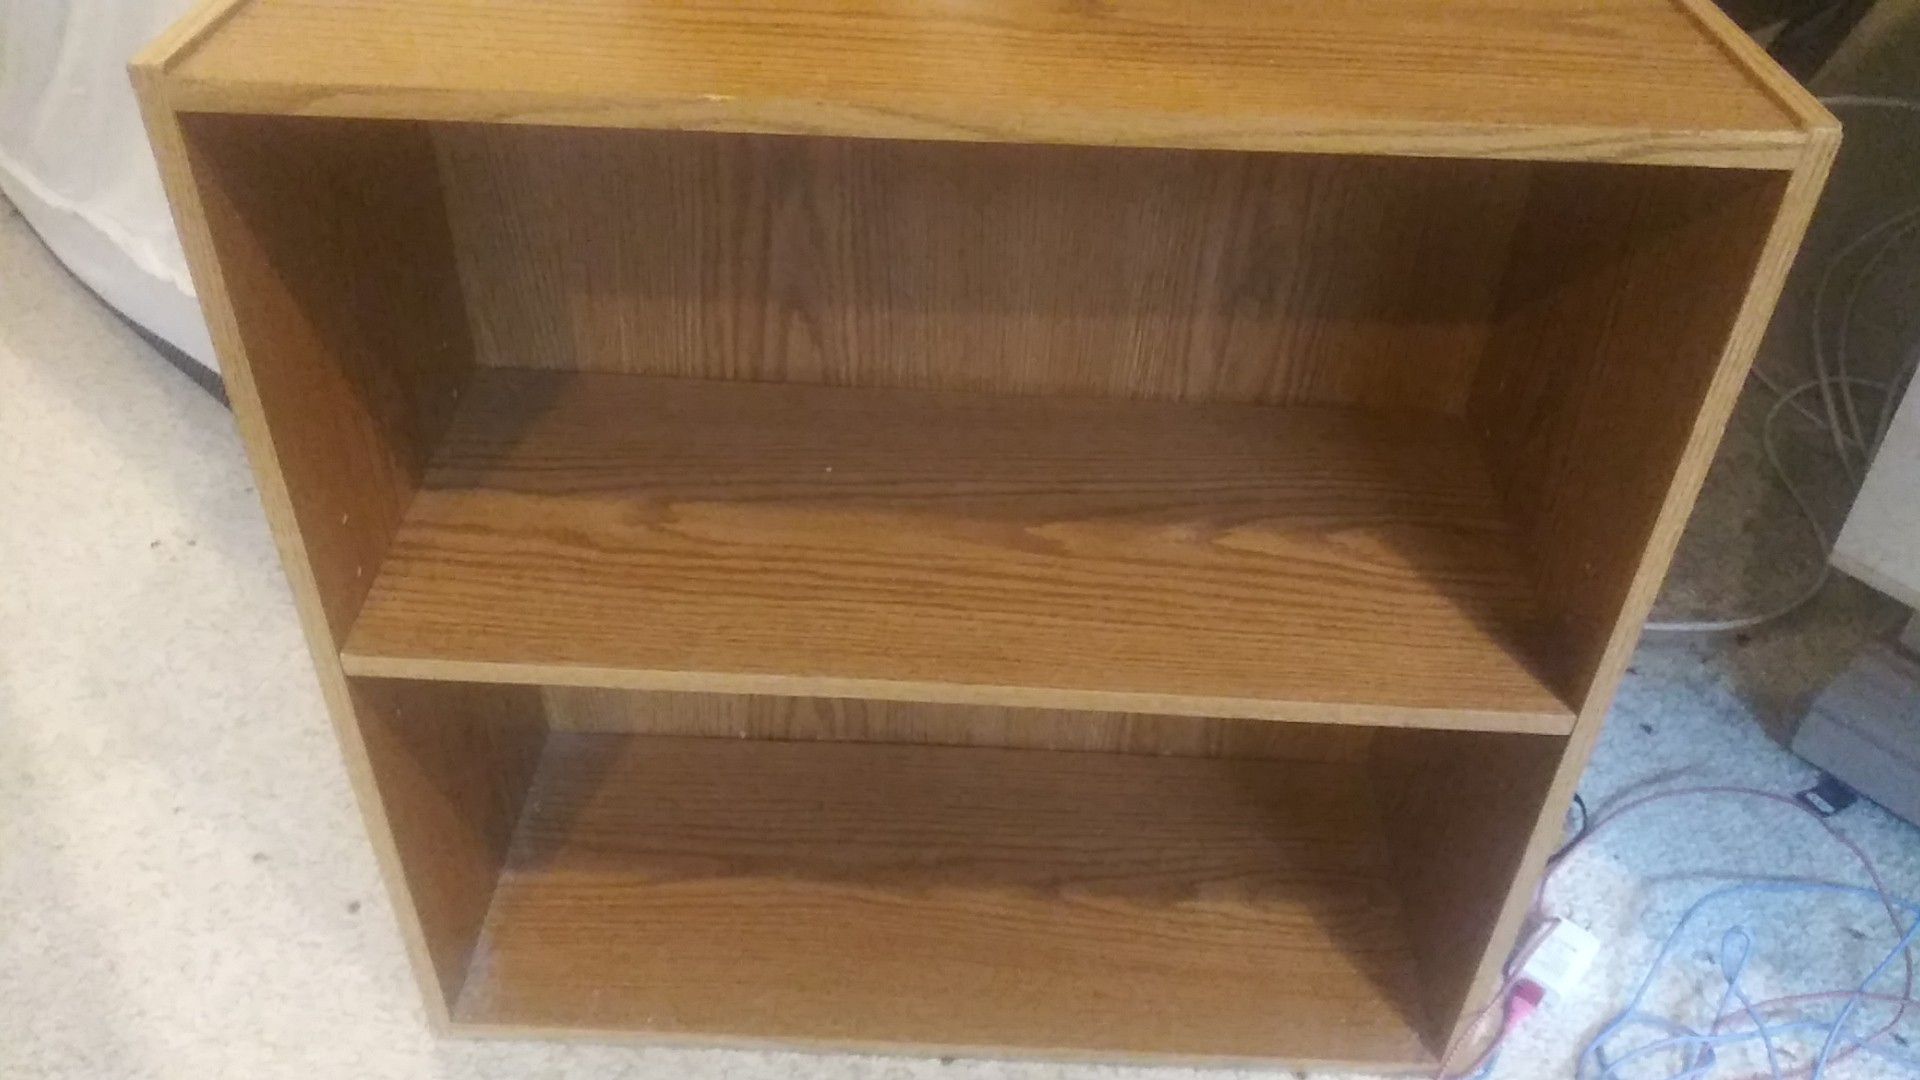 FREE Small book shelf / stand NEED GONE TODAY 12/7/19